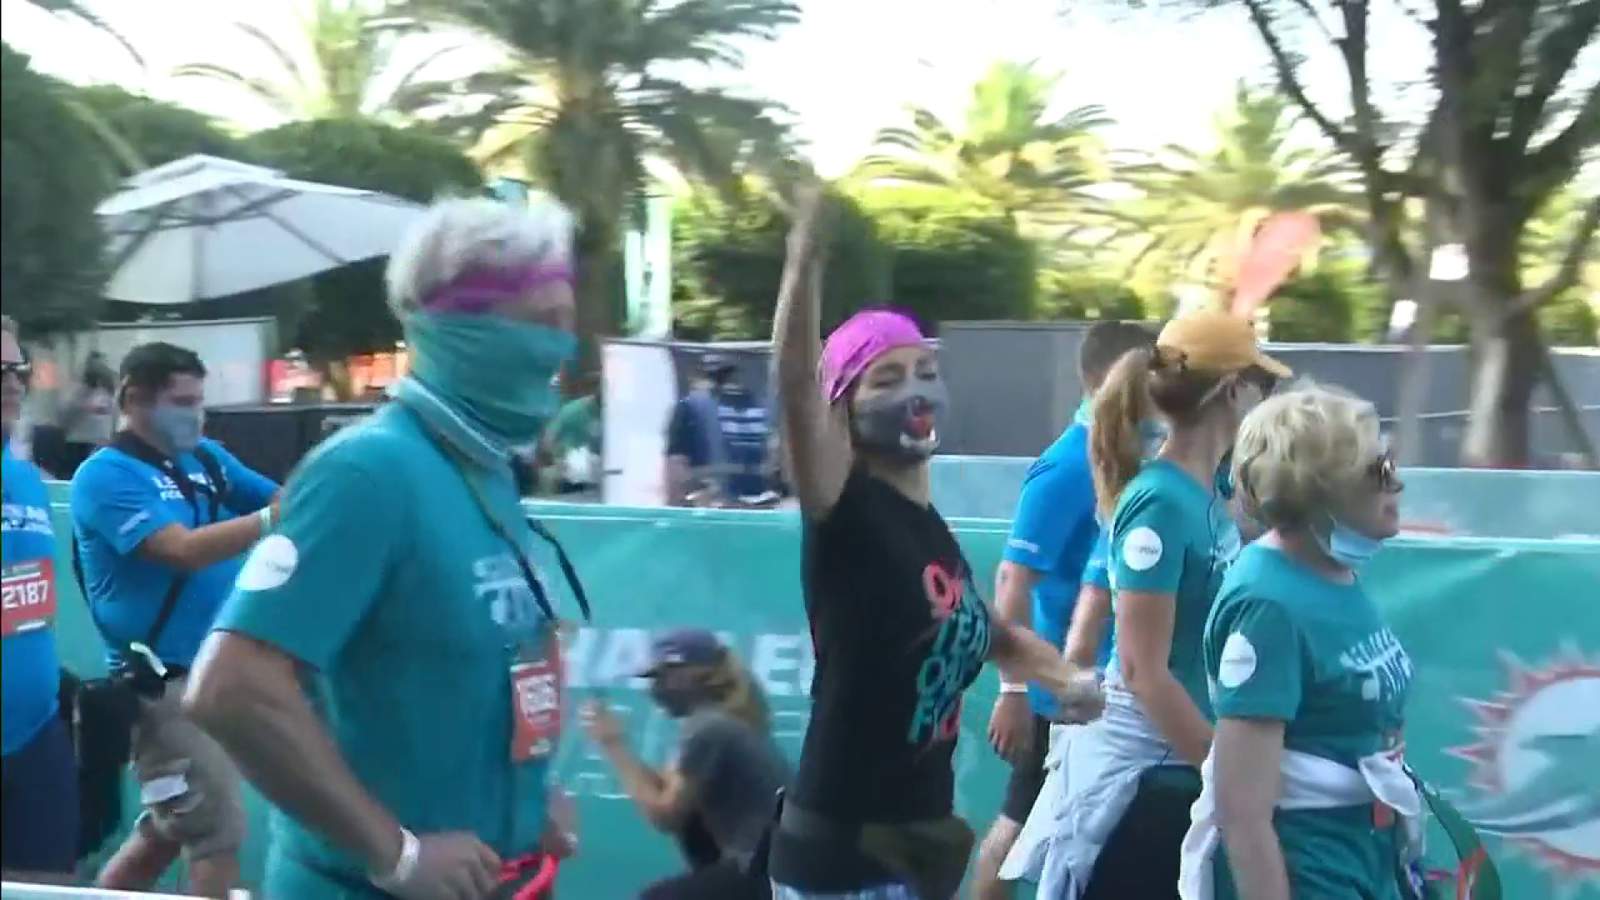 Local 10′s Janine Stanwood, cancer survivor, runs 5K for herself and others, she says